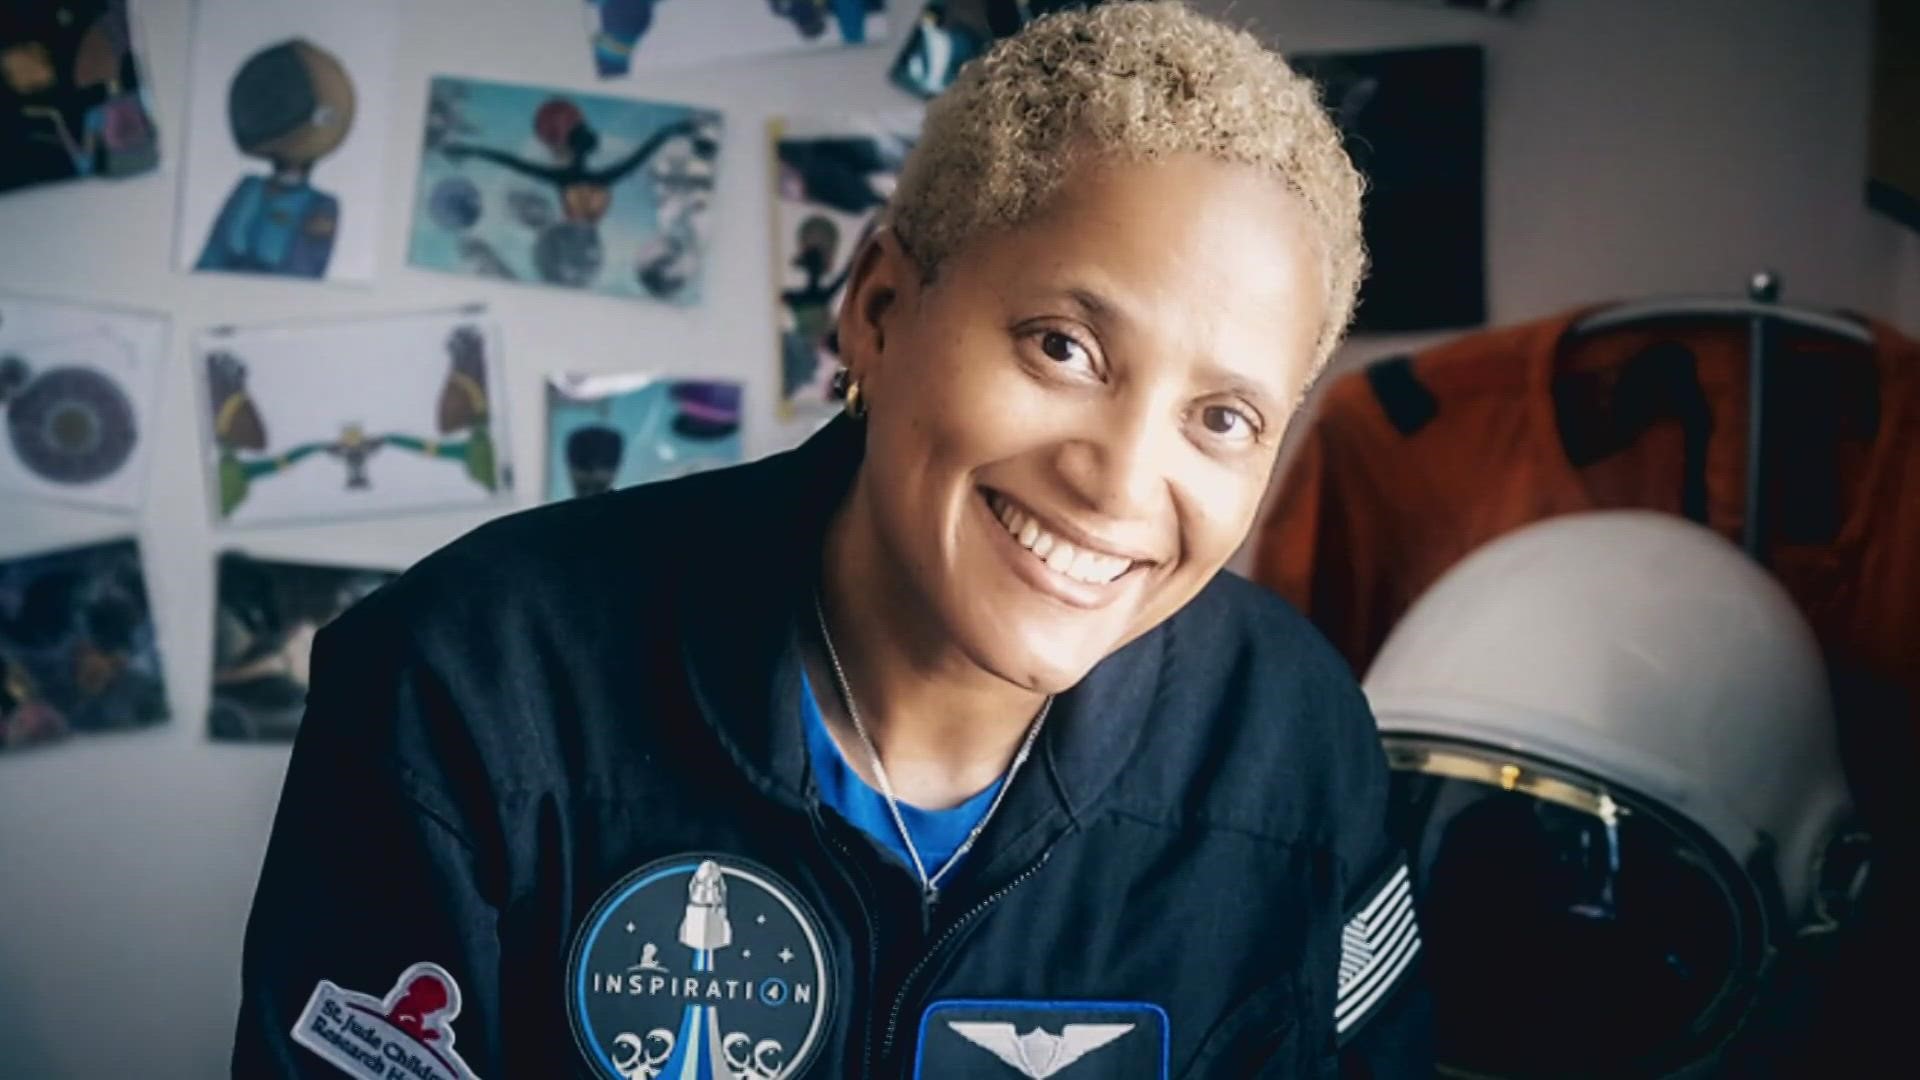 Dr. Proctor is an ASU professor and the first Black woman to pilot a spacecraft.